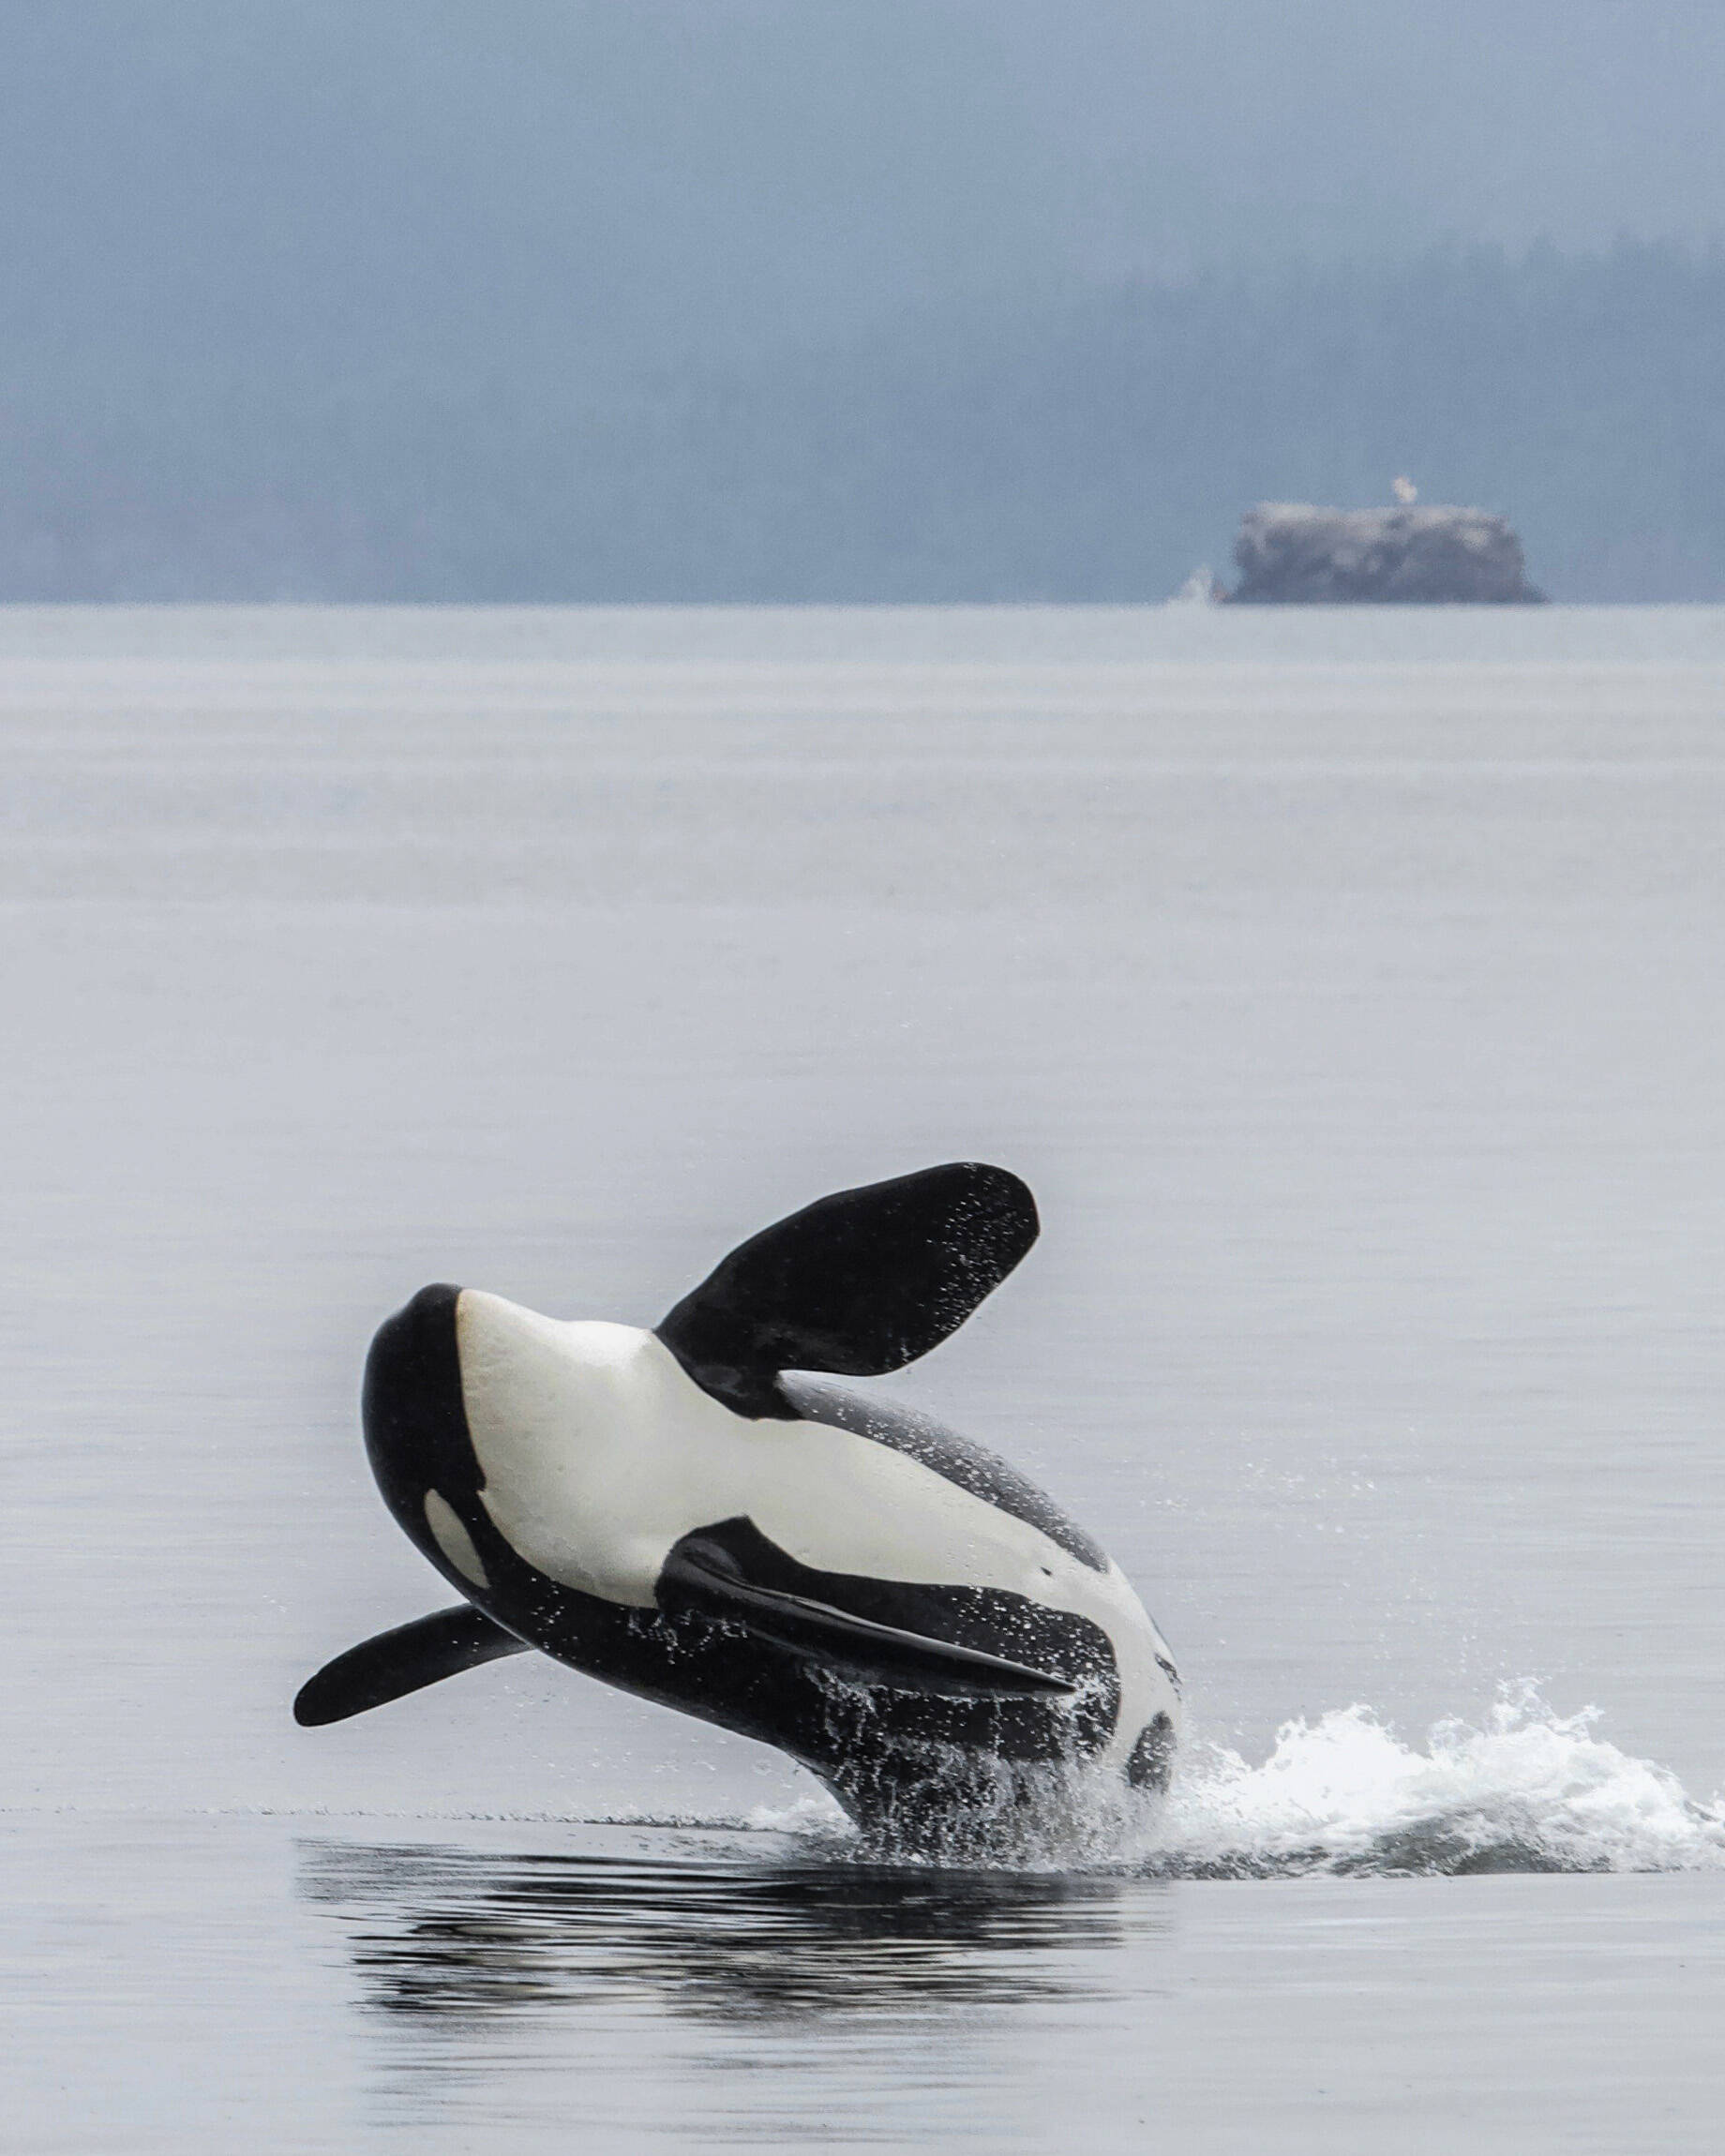 A killer whale breeches in Kachemak Bay in July 2018. Killer whales can be identified by the patterns on their dorsal fins and body. (Photo by Emma Luck)